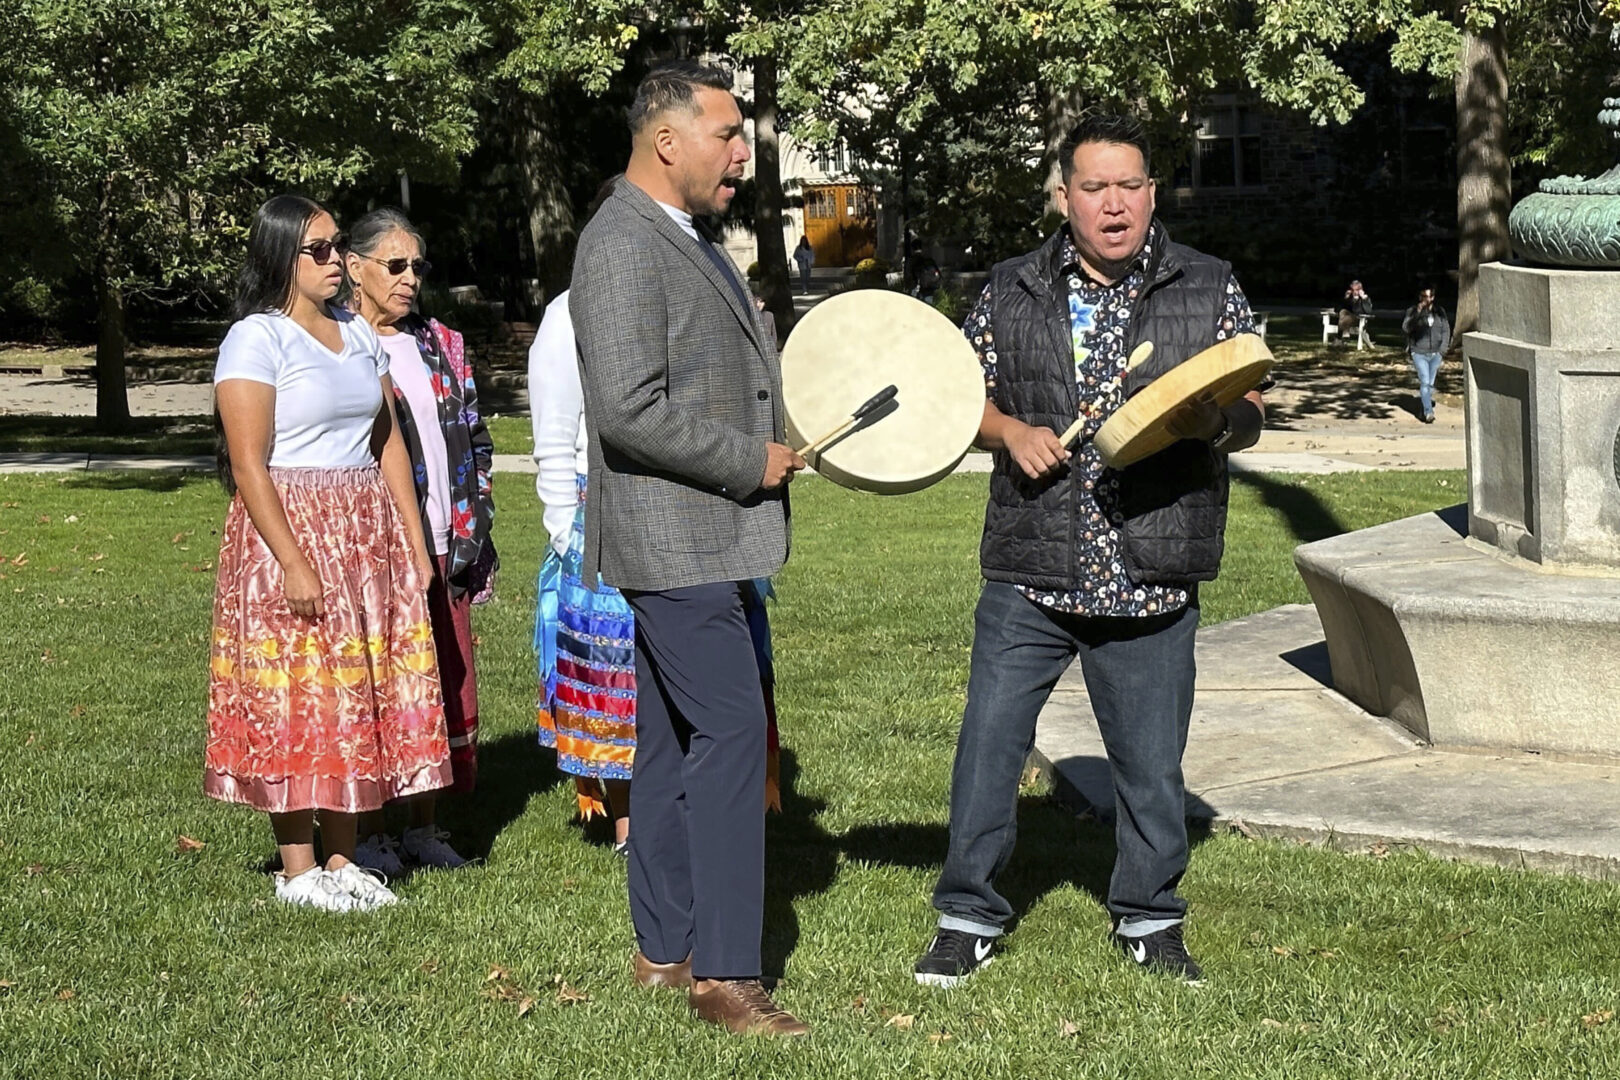 Jason Hale, center with drum, from the Institute for Indigenous Studies at Lehigh University, sings an indigenous song during a ceremony announcing the Indigenous Peoples Cultural and Heritage Tourism Initiative, Friday, Oct. 13, 2023, at Lehigh University in Bethlehem, Pa. Pennsylvania's lack of federally recognized tribal nations means there's been an incomplete picture of its Native American culture and history, officials said Friday, announcing a grant-funded program designed to change that. 